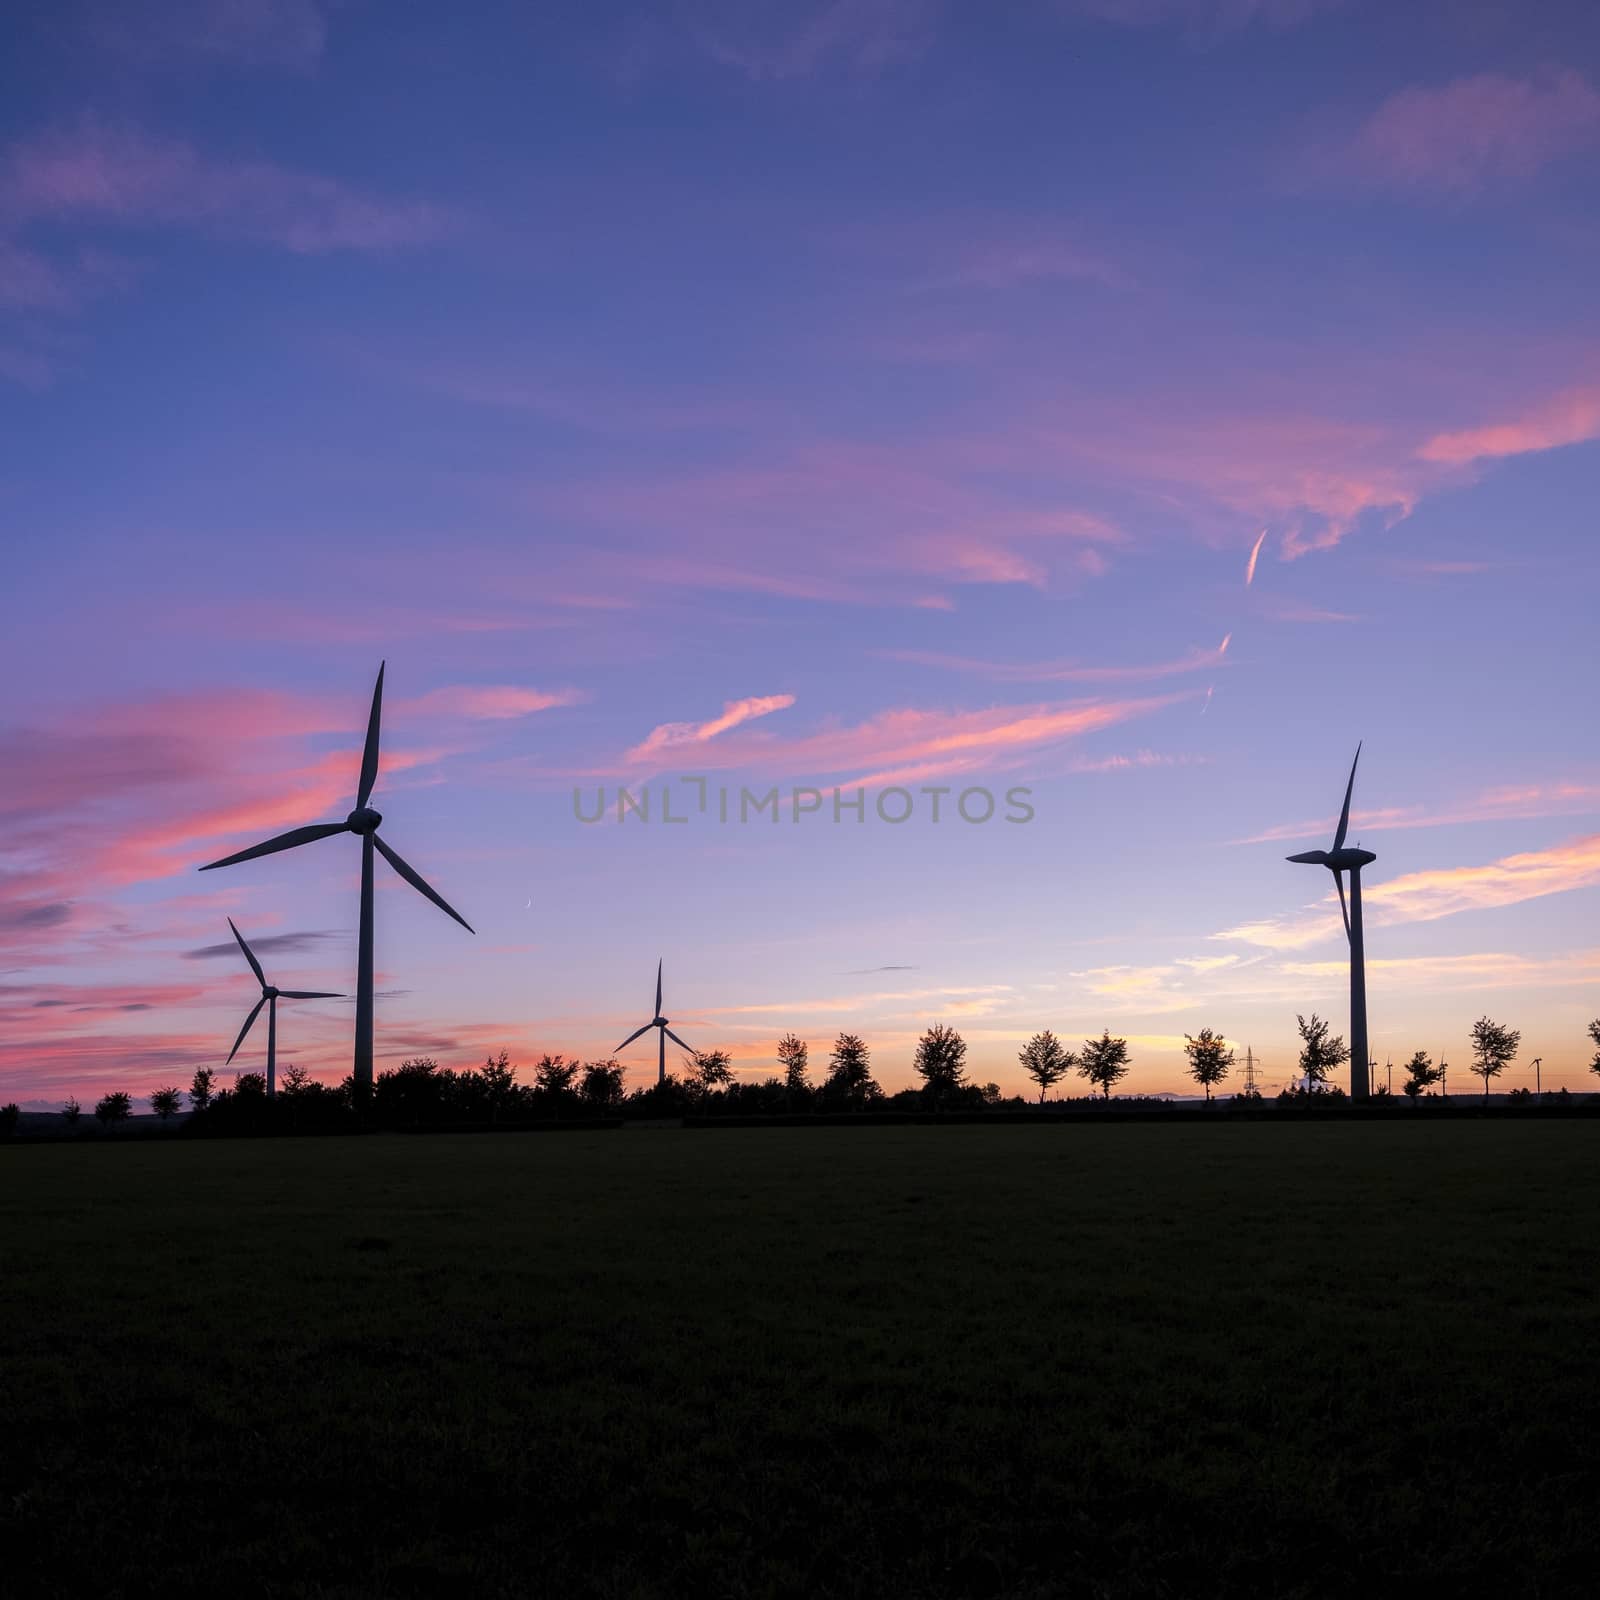 wind turbines and trees form silhouettes against colorful sunset by ahavelaar